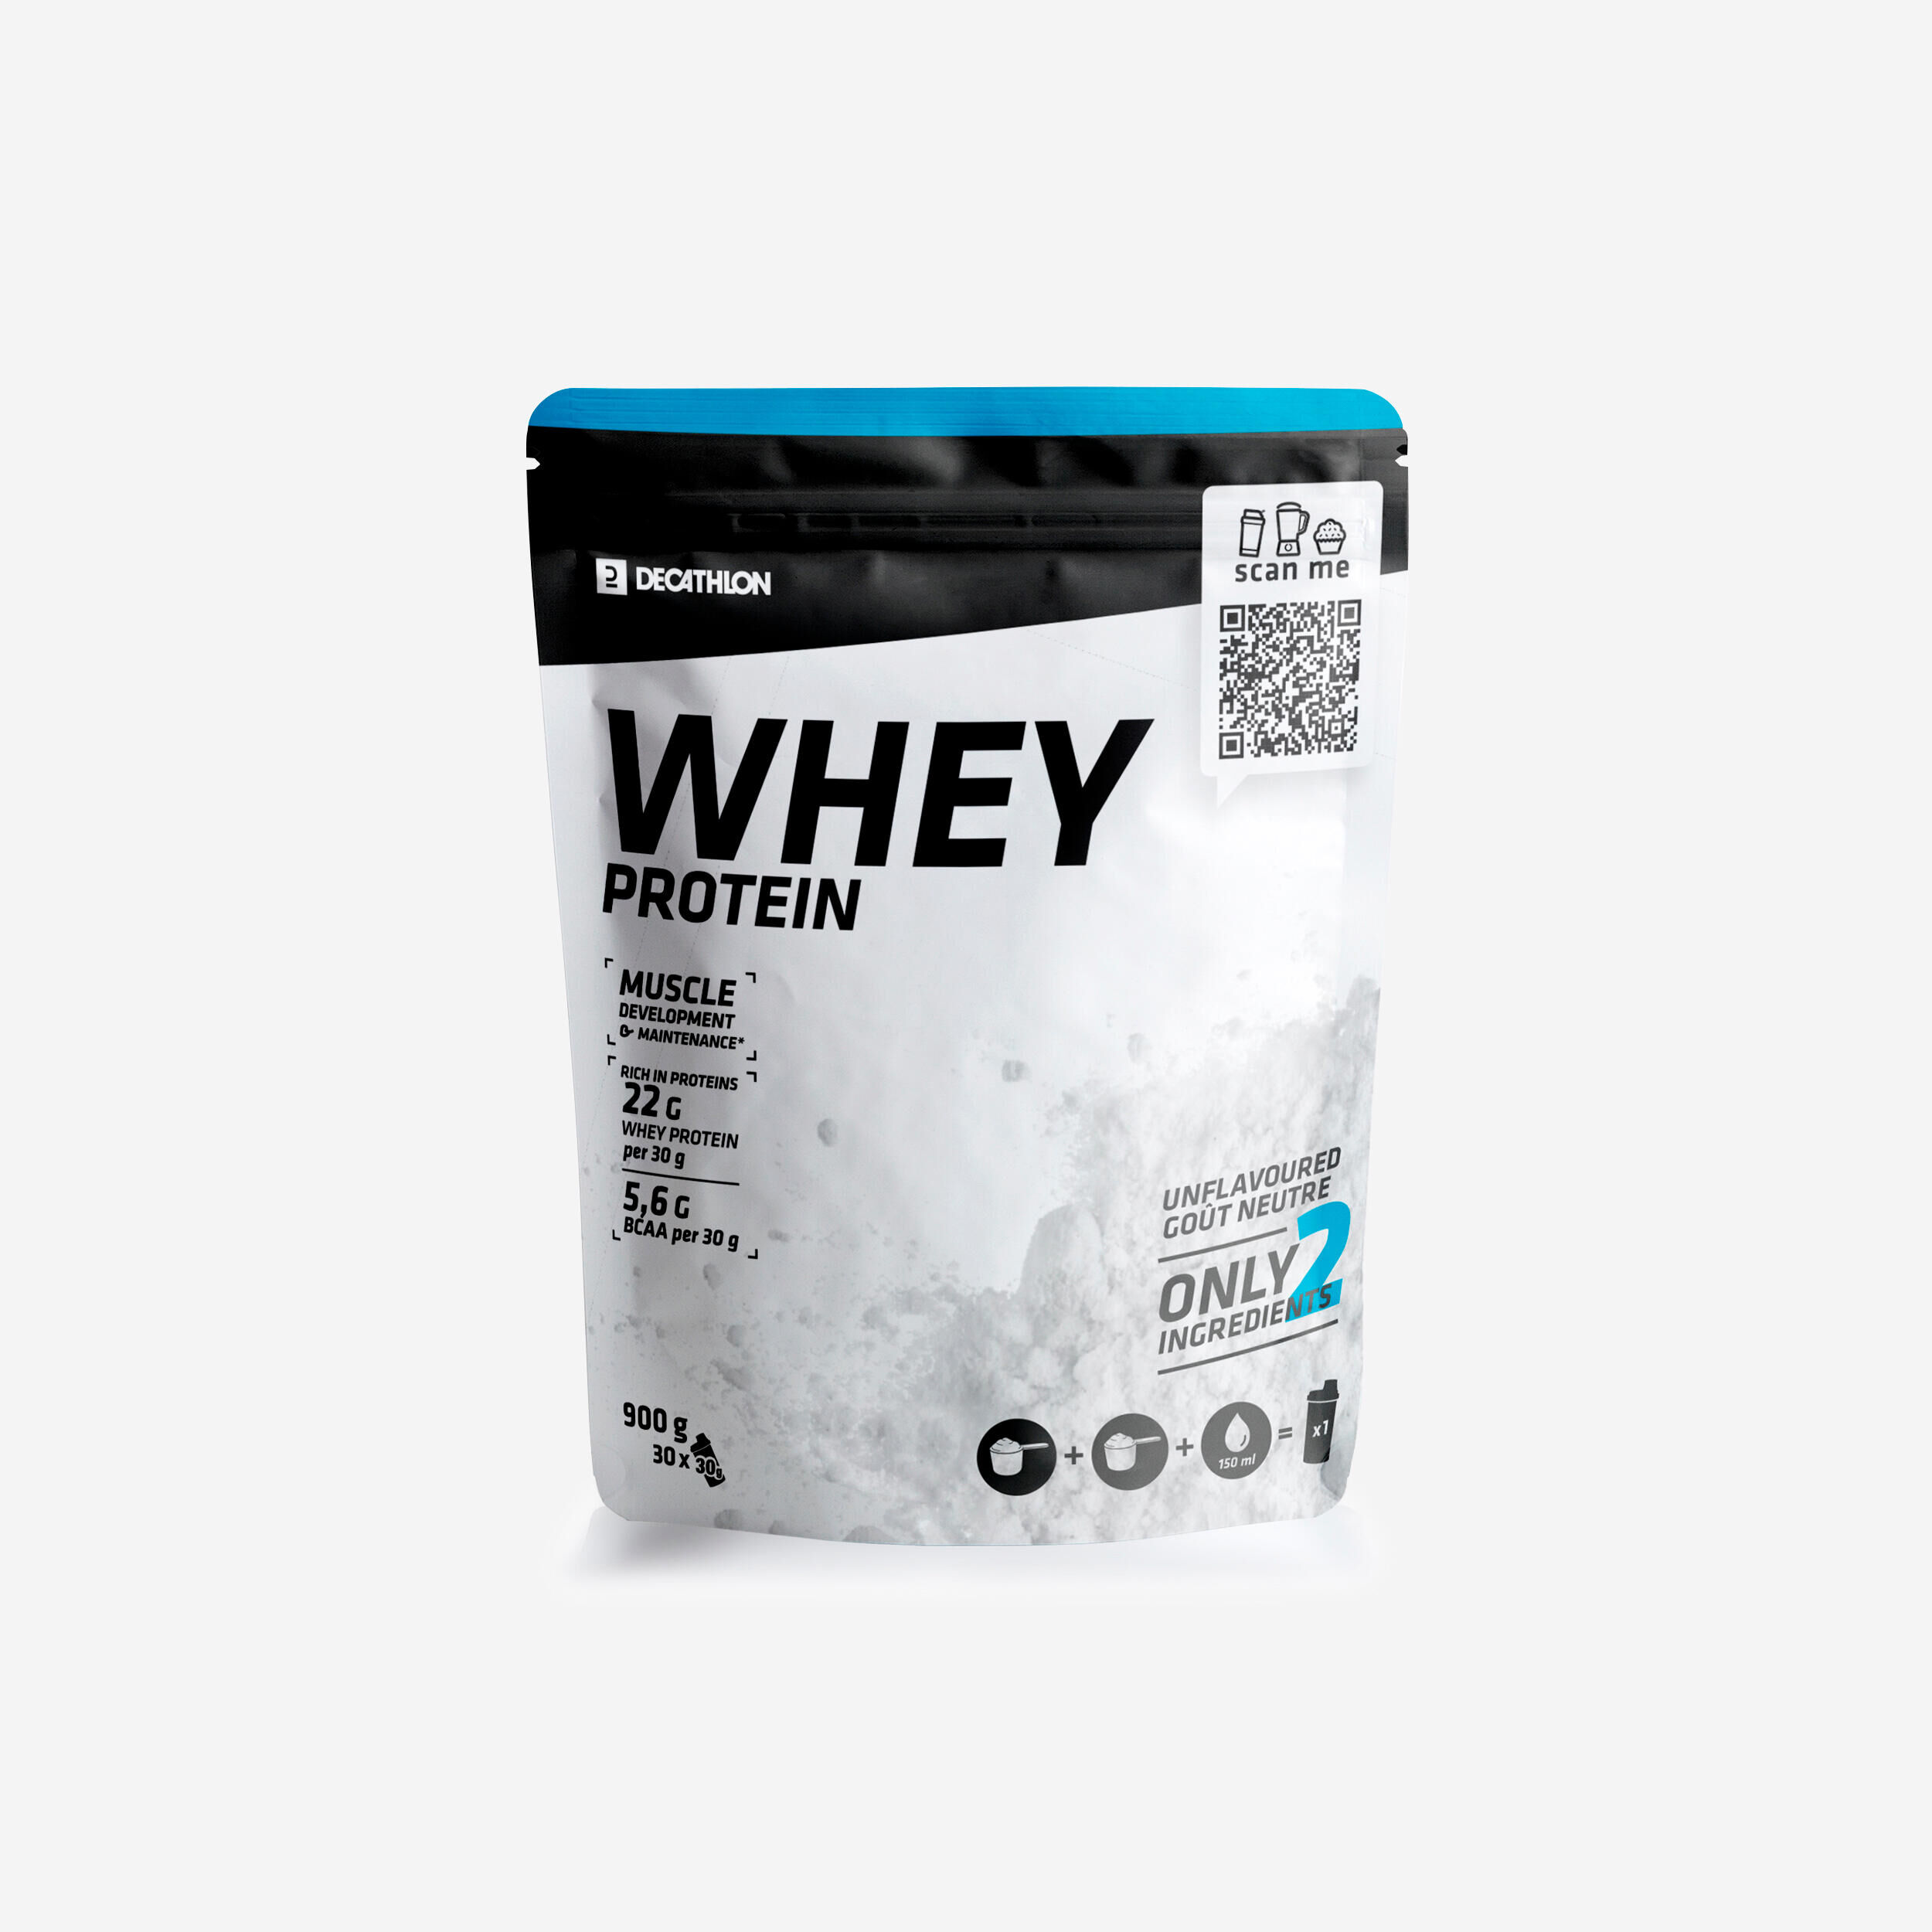 CORENGTH Whey Protein 900g - Unflavoured